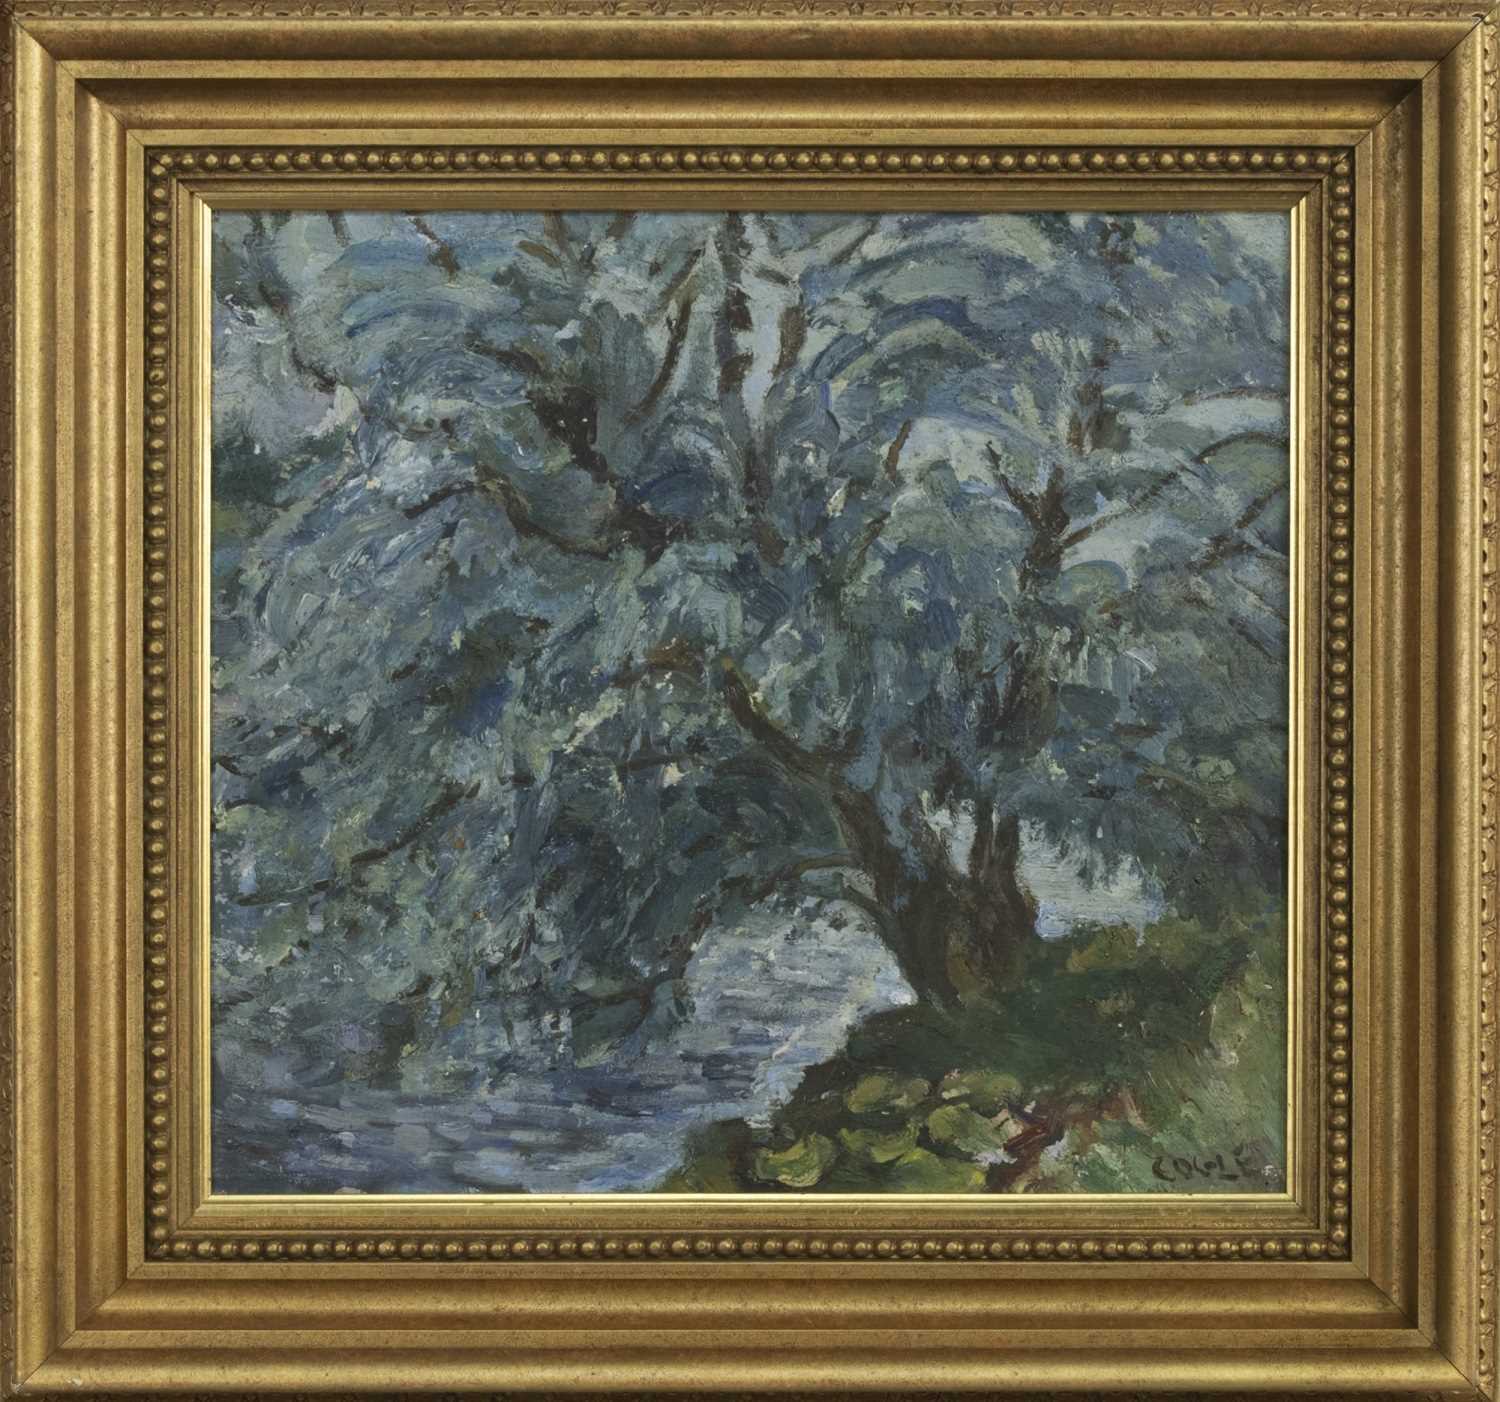 Lot 323 - SUMMER, SMALL STREAM, AN OIL BY HENRY COGLE